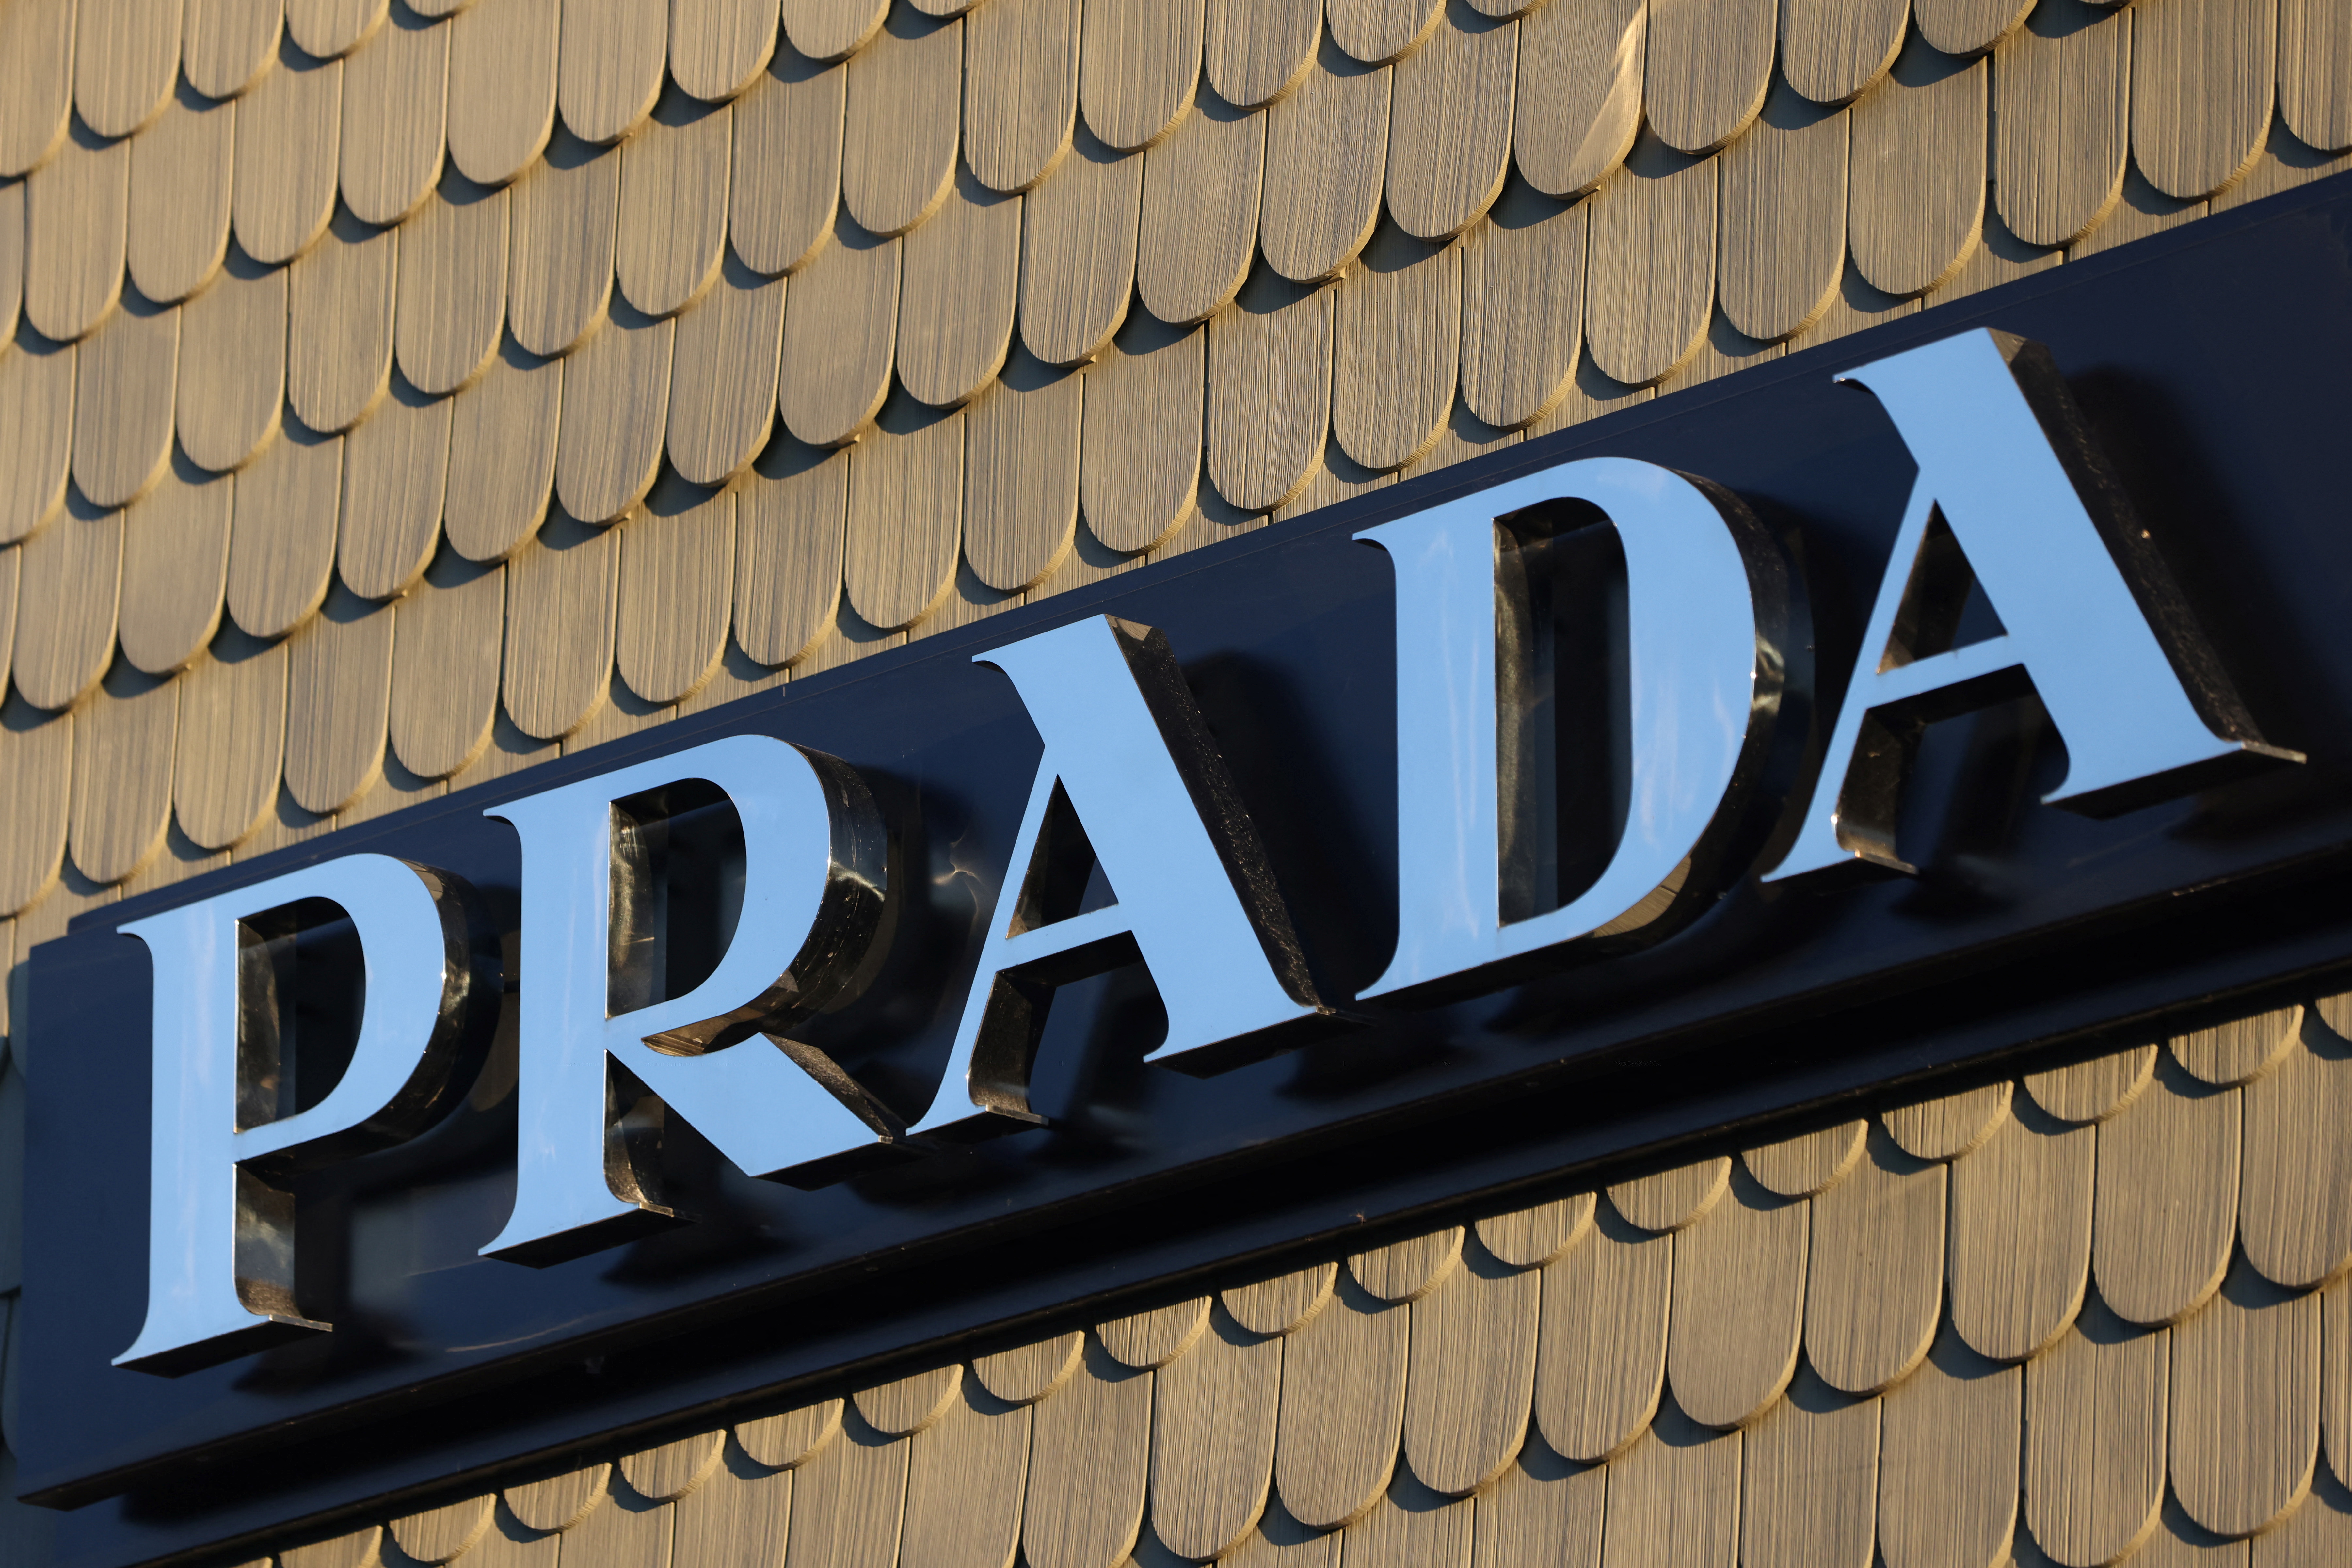 Prada at the Woodbury Common Premium Outlets in Central Valley, New York